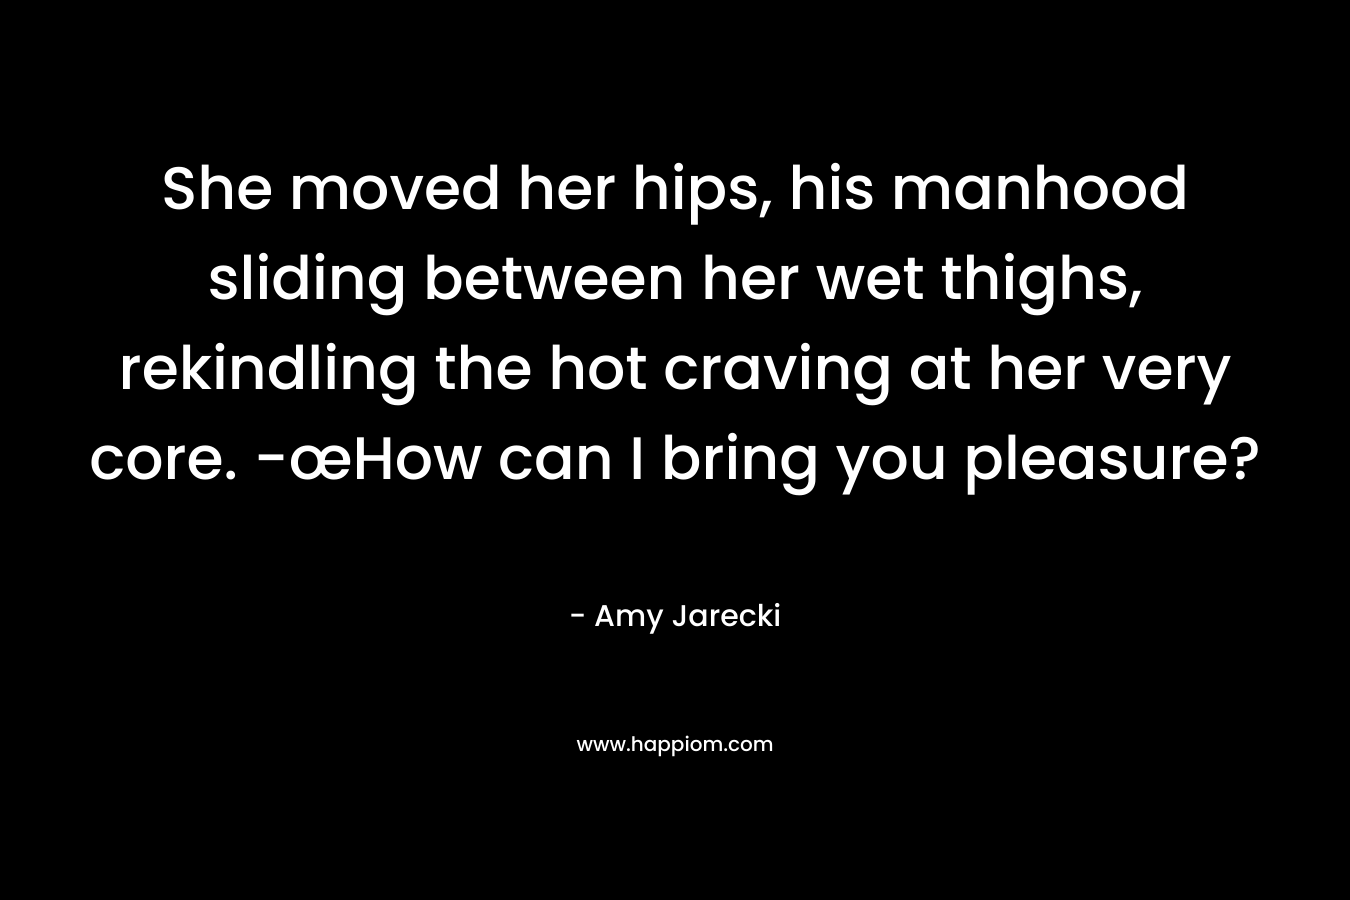 She moved her hips, his manhood sliding between her wet thighs, rekindling the hot craving at her very core. -œHow can I bring you pleasure? – Amy Jarecki